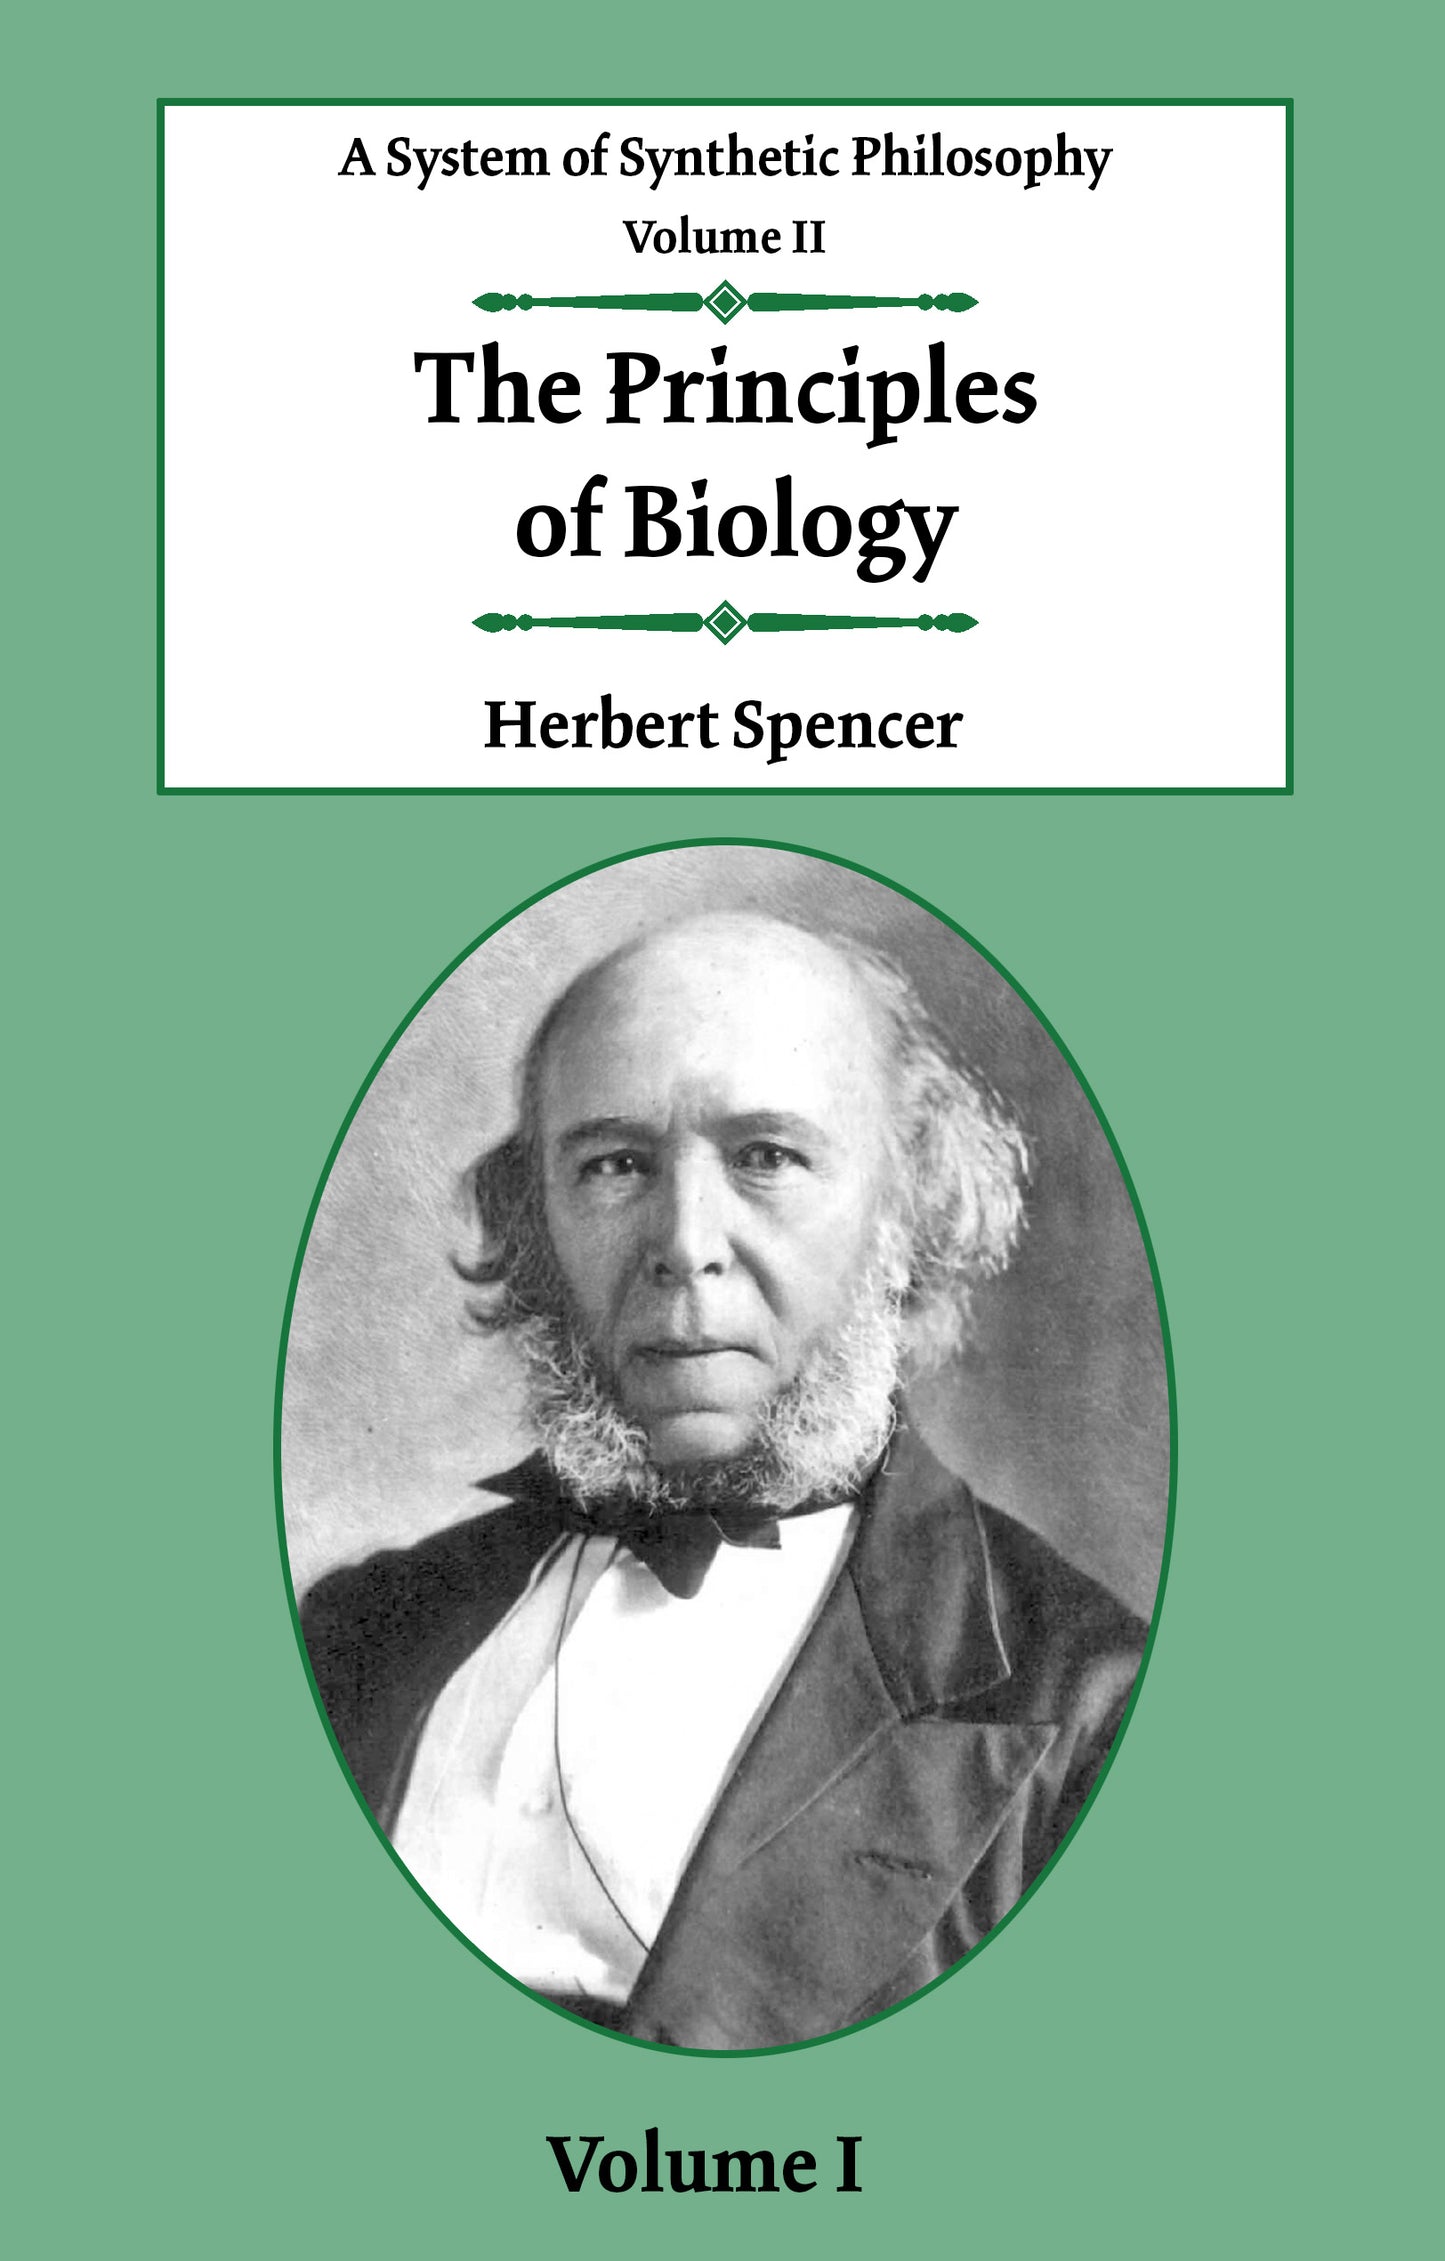 A System of Synthetic Philosophy: Volume 2: The Principles of Biology, Book 1